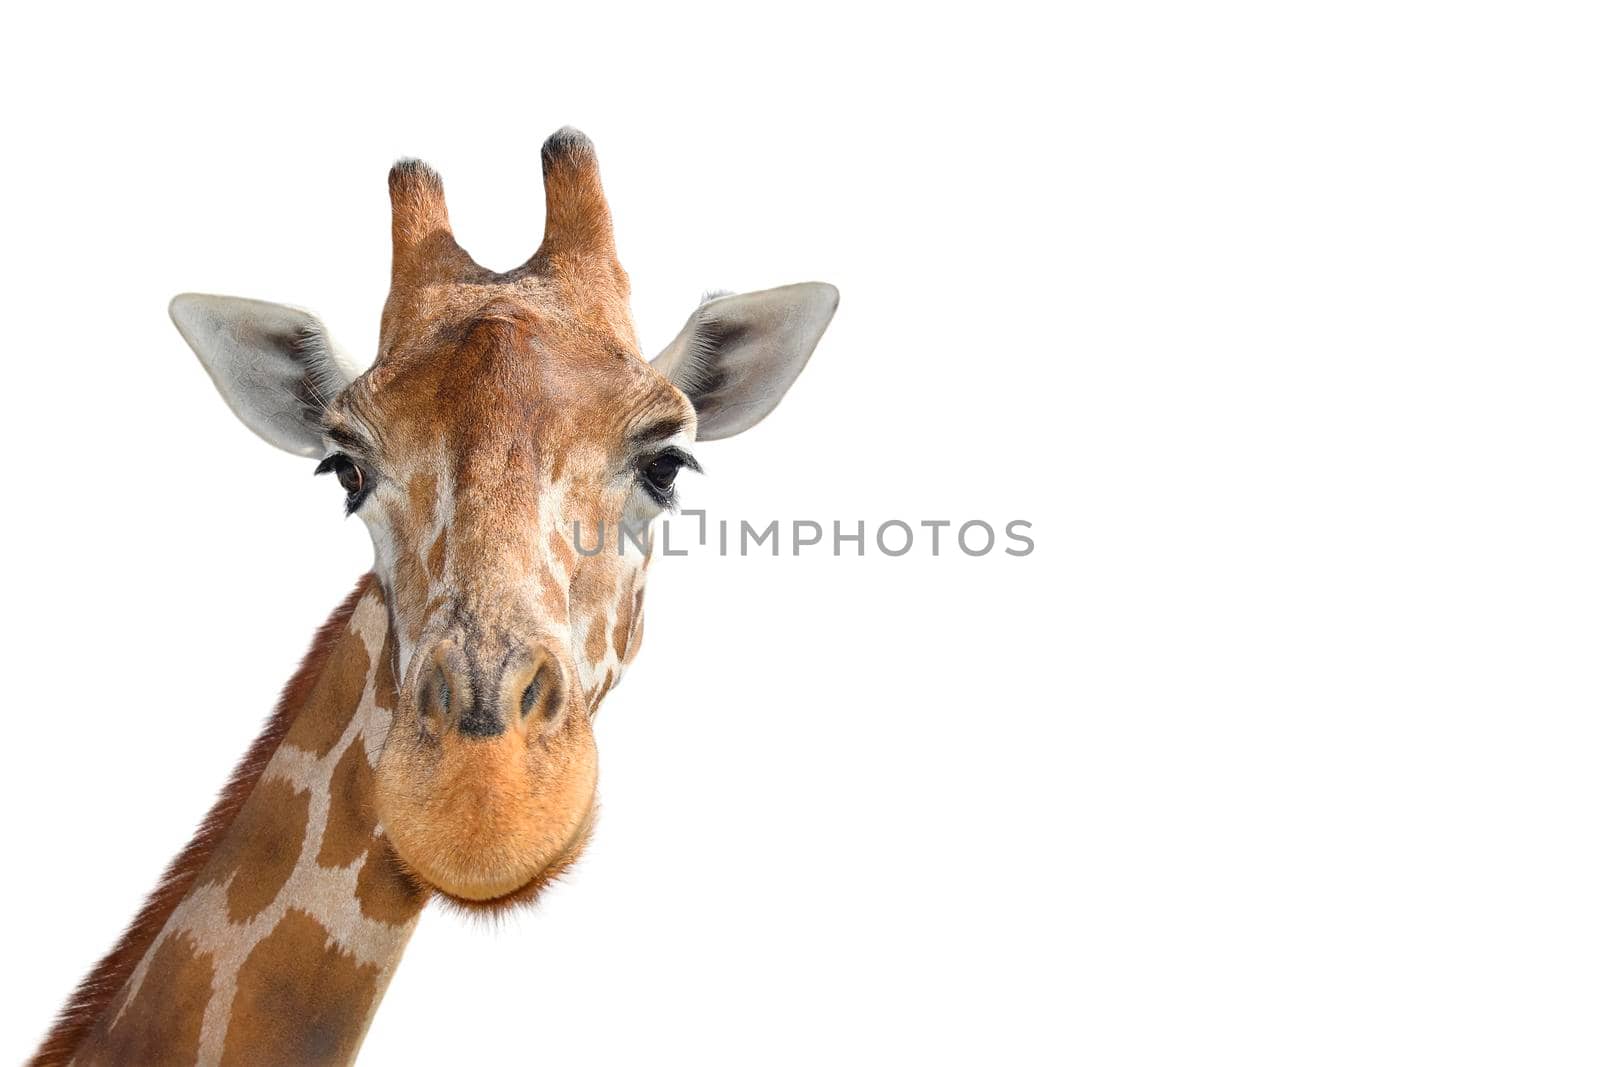 Portrait of Young funny giraffe standing close up on white background. Funny giraffe head close up. Zoo animals isolated. Copy space